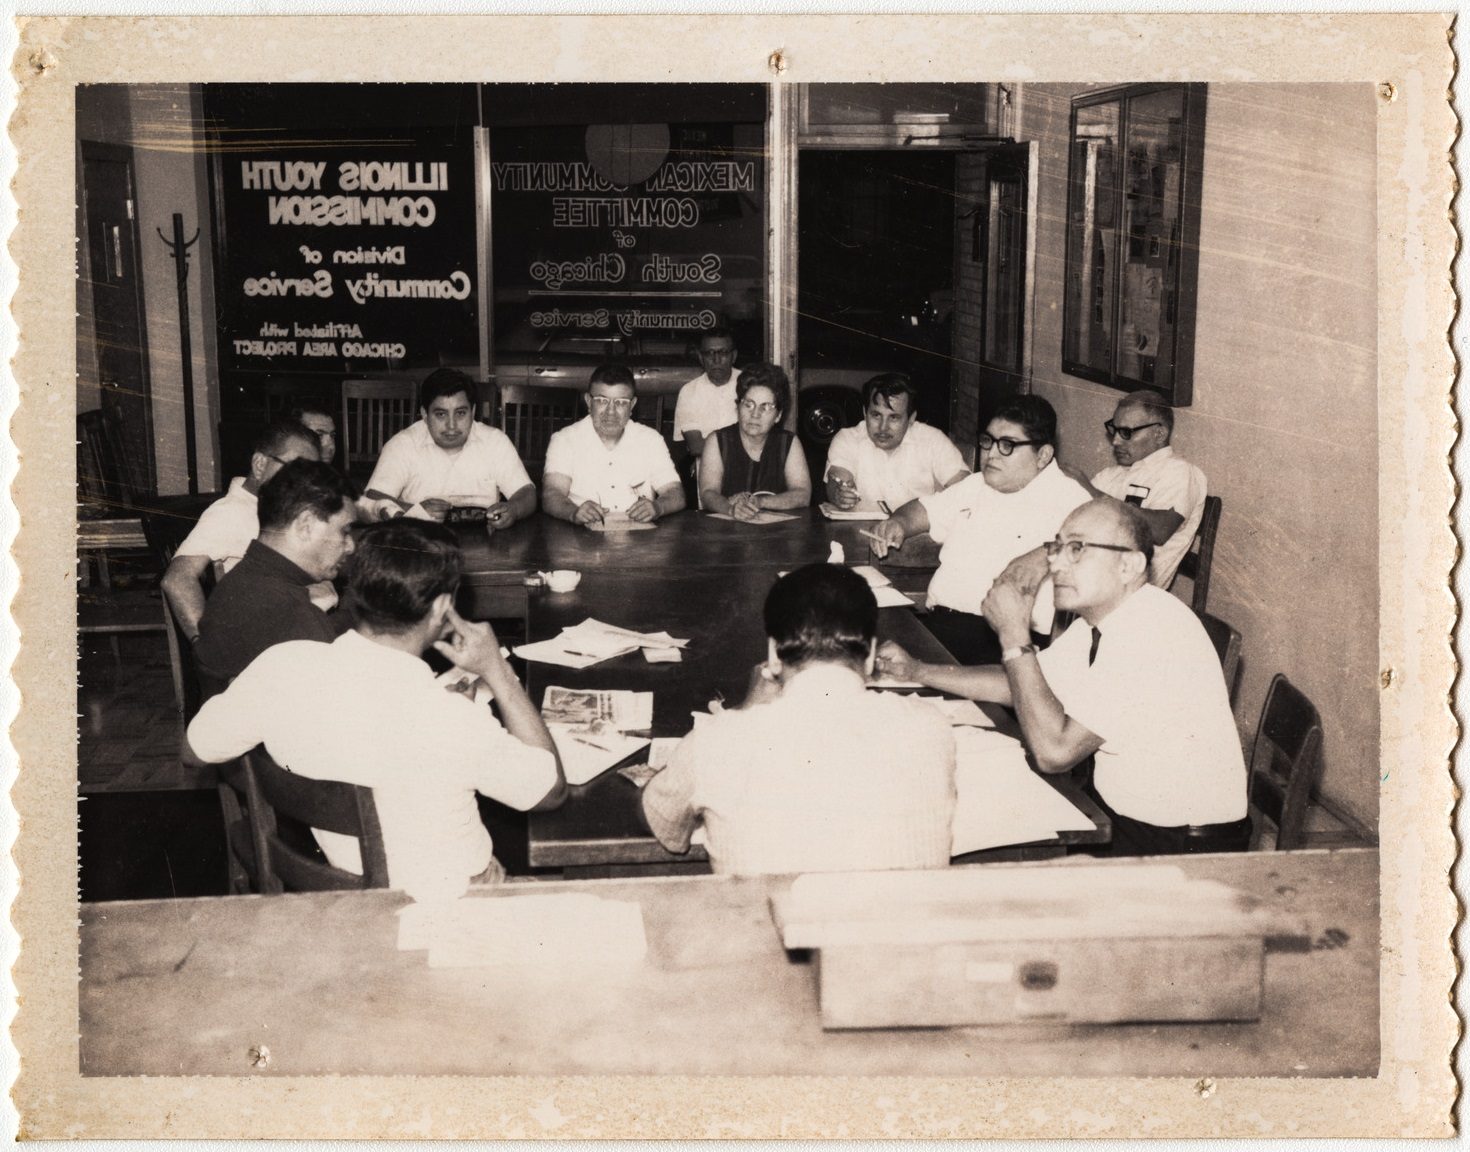 Members of the Mexican Community Committee of South Chicago meeting, Chicago, Illinois, circa 1960s-1970s